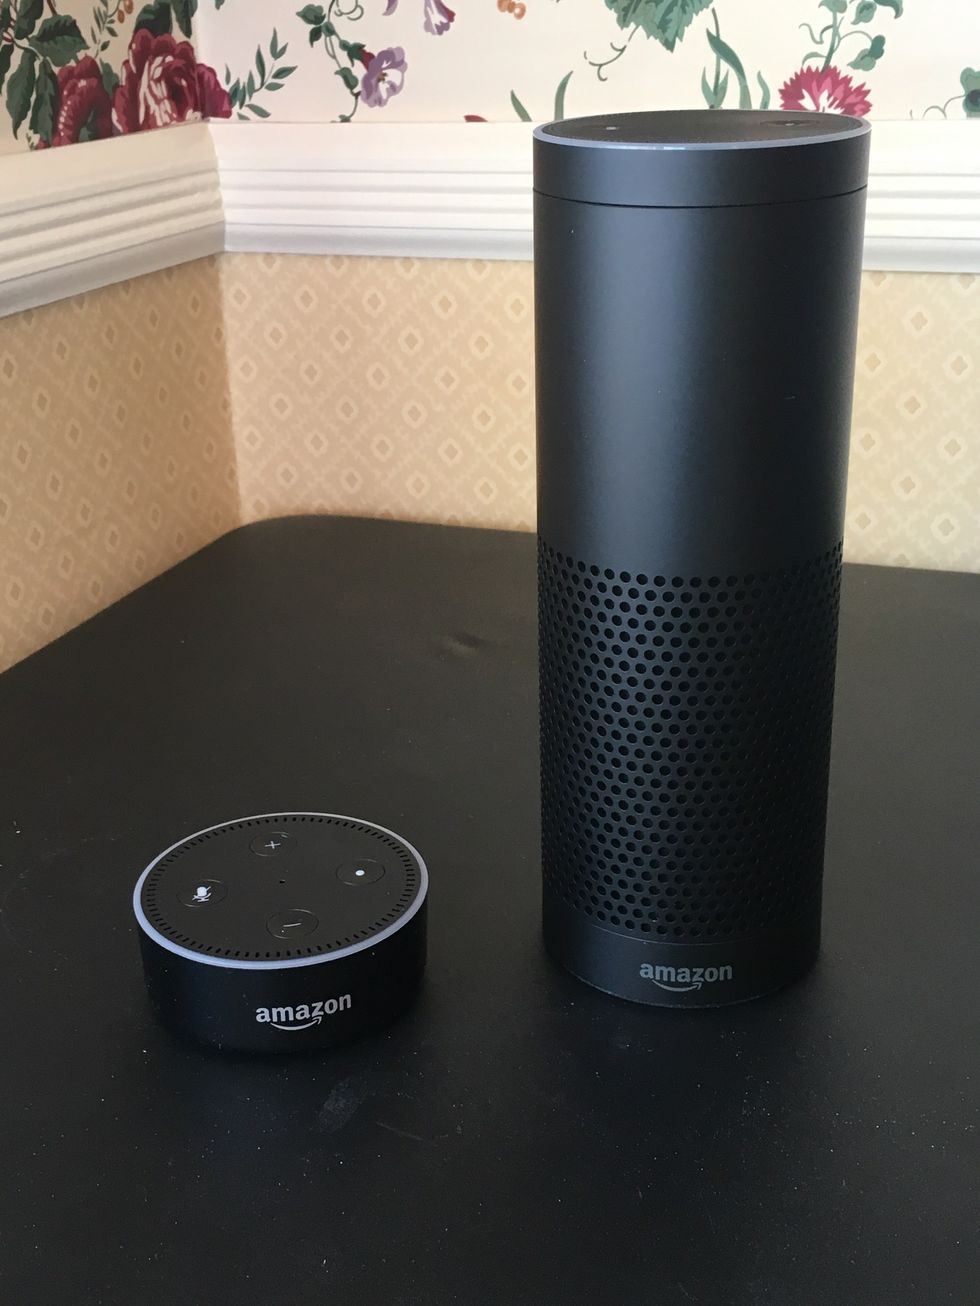 A photo of amazon echo and echo dot 1st gens next to each other on a table